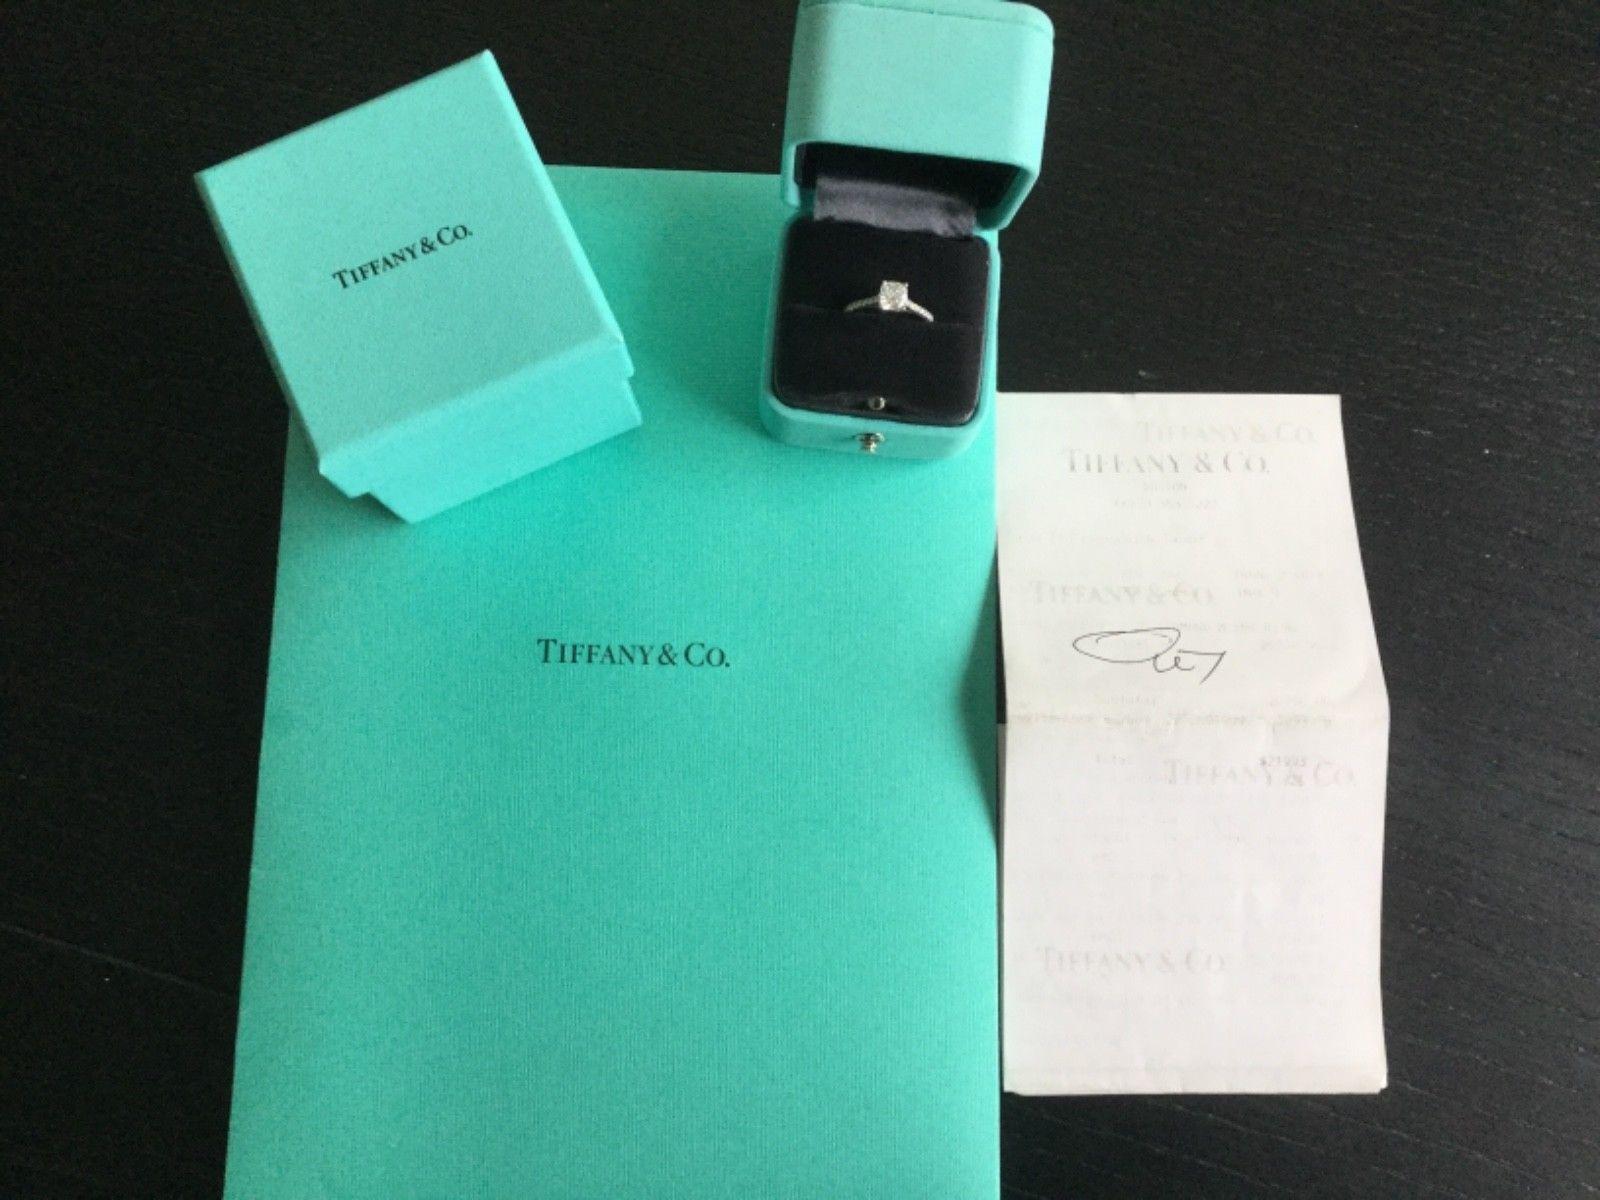 Being offered for your consideration is a basically brand new Tiffany & Co Platinum and Diamond 1.02 carat natural cushion cut NOVO engagement ring set in the NEW DESIGN NOVO pave diamond band. This ring was purchased in 2017 for $21,993 and the